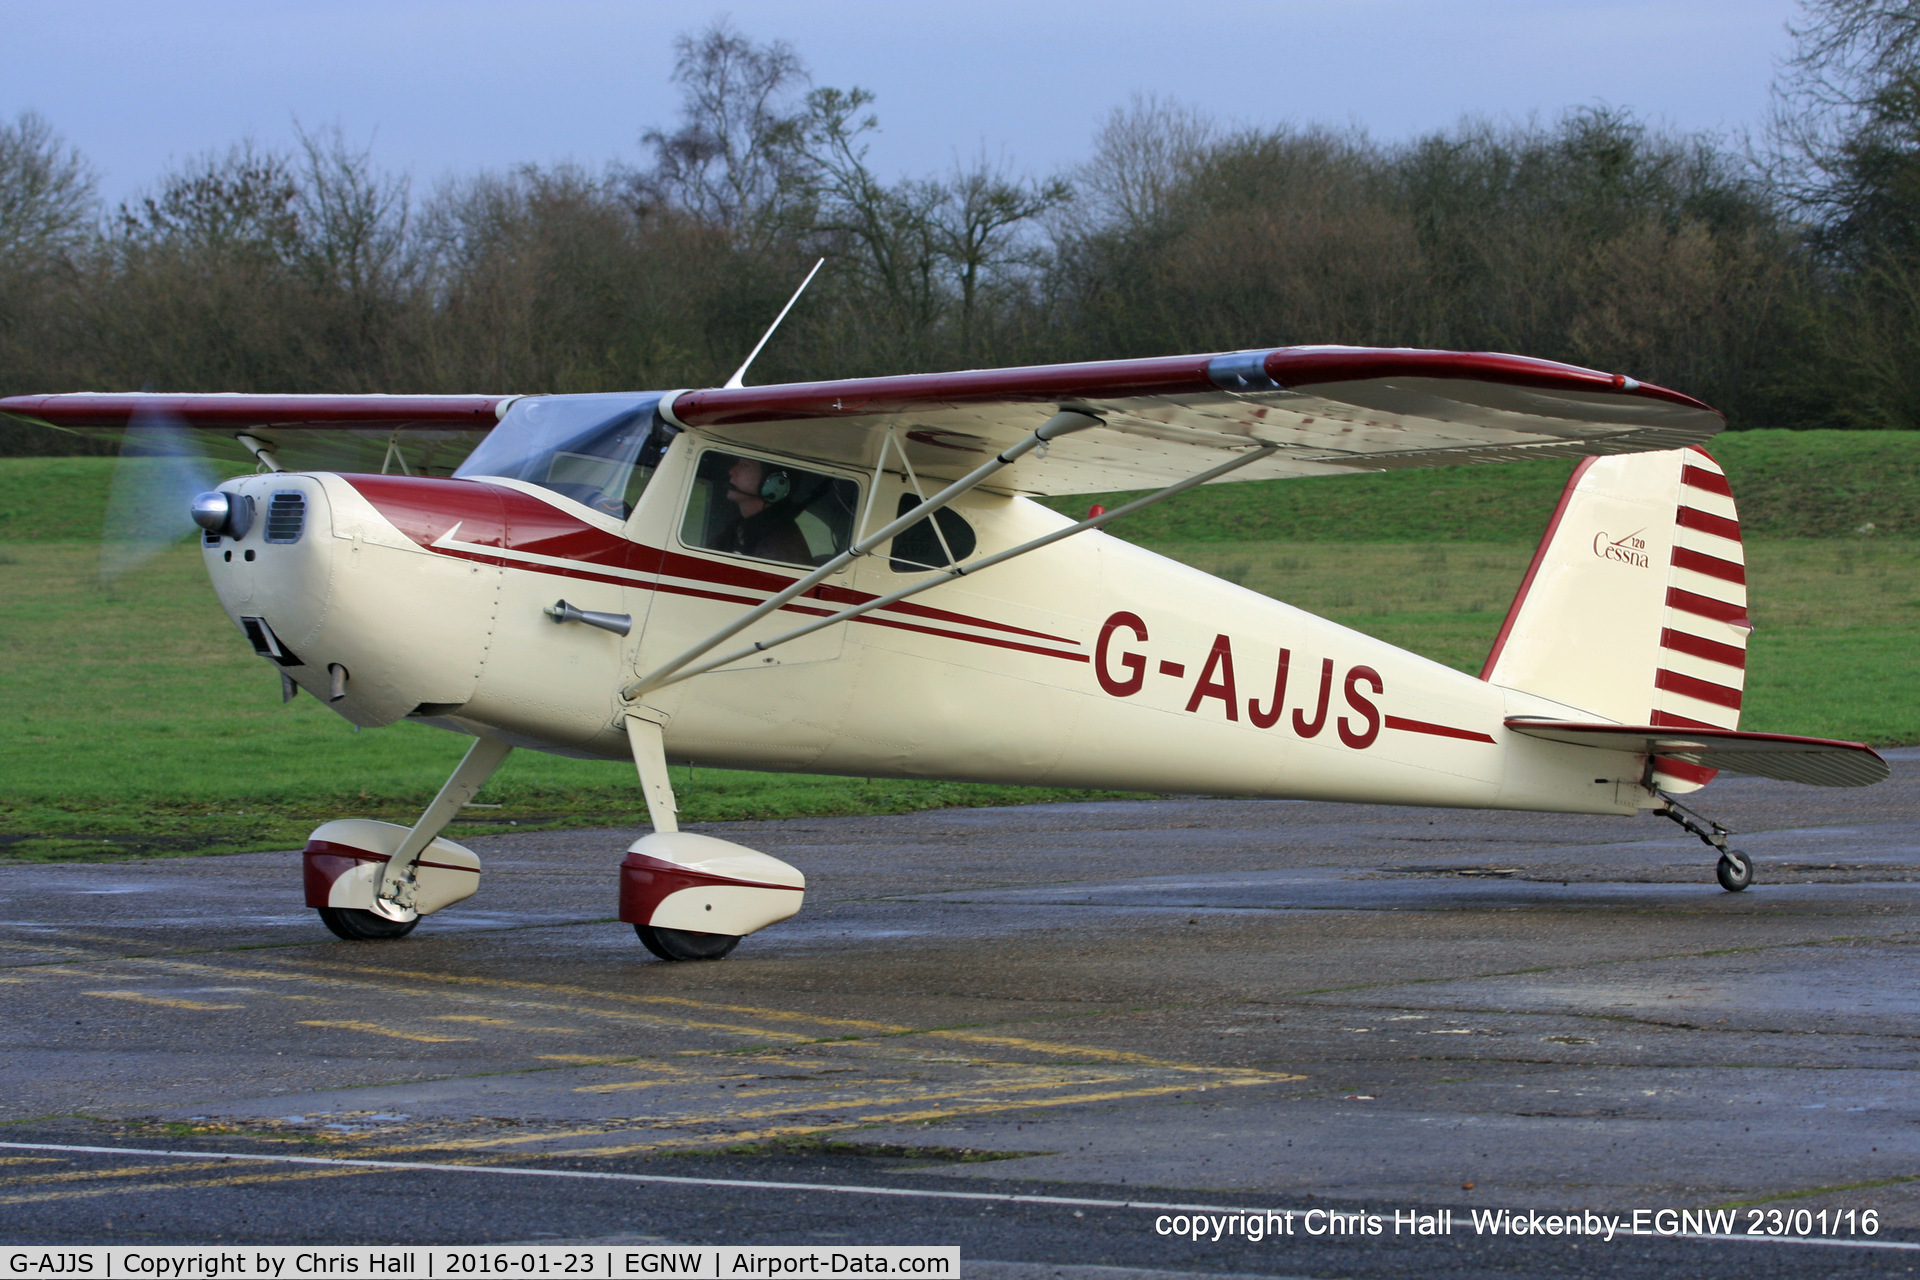 G-AJJS, 1947 Cessna 120 C/N 13047, now with its new wheel spats fitted